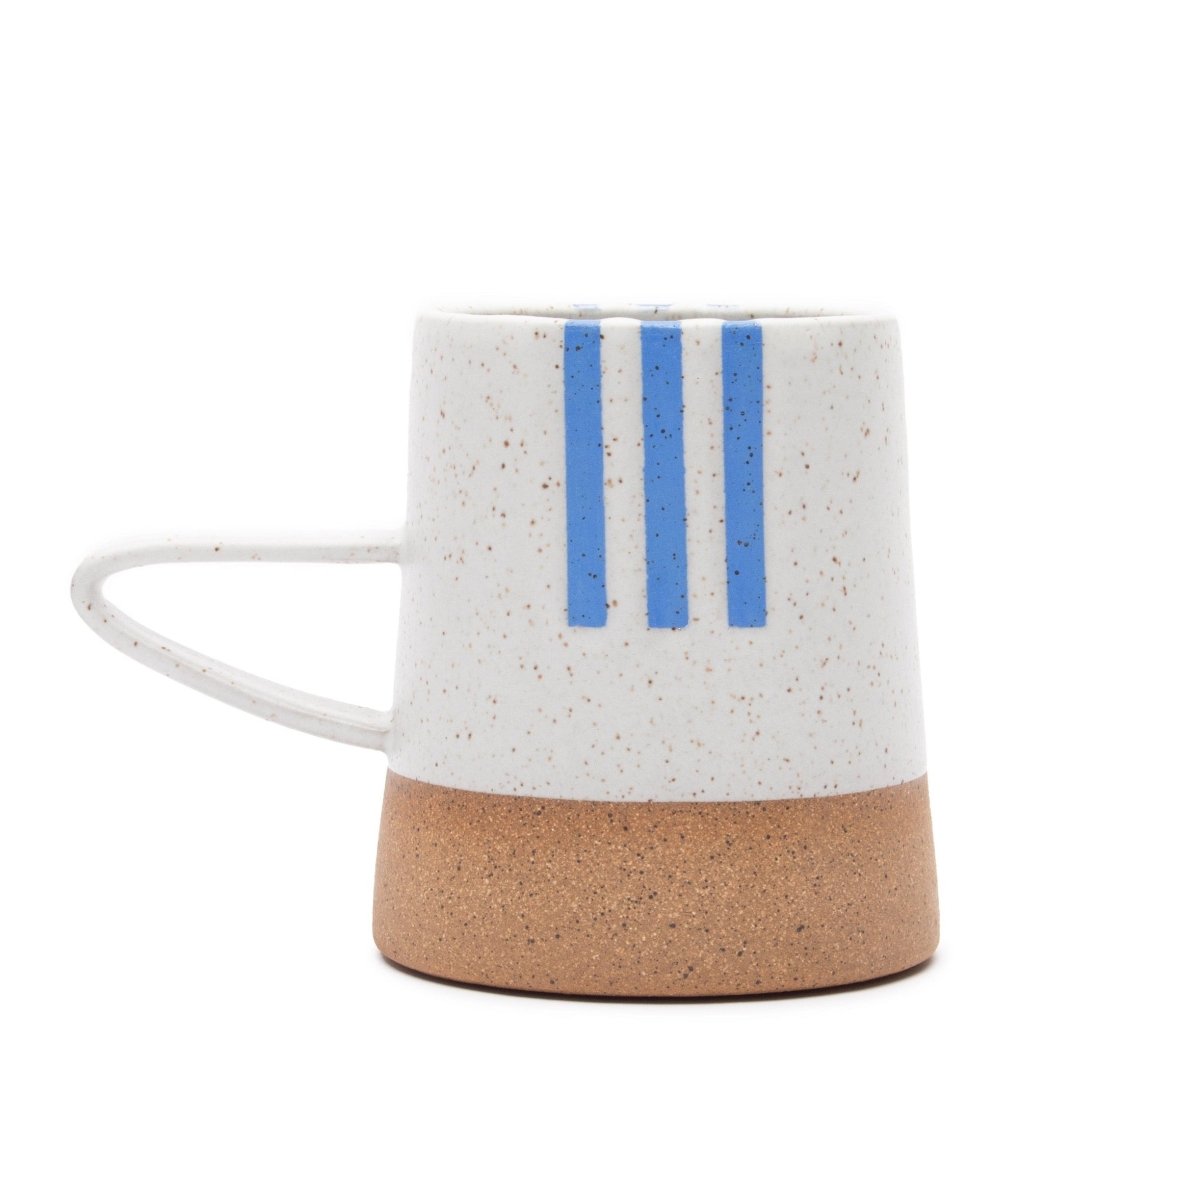 Handle mug with a white speckled and natural clay finish along with blue detailing. The Tucker Mug with Red Detail is designed and handmade by Wolf Ceramics in Hood River, Oregon.